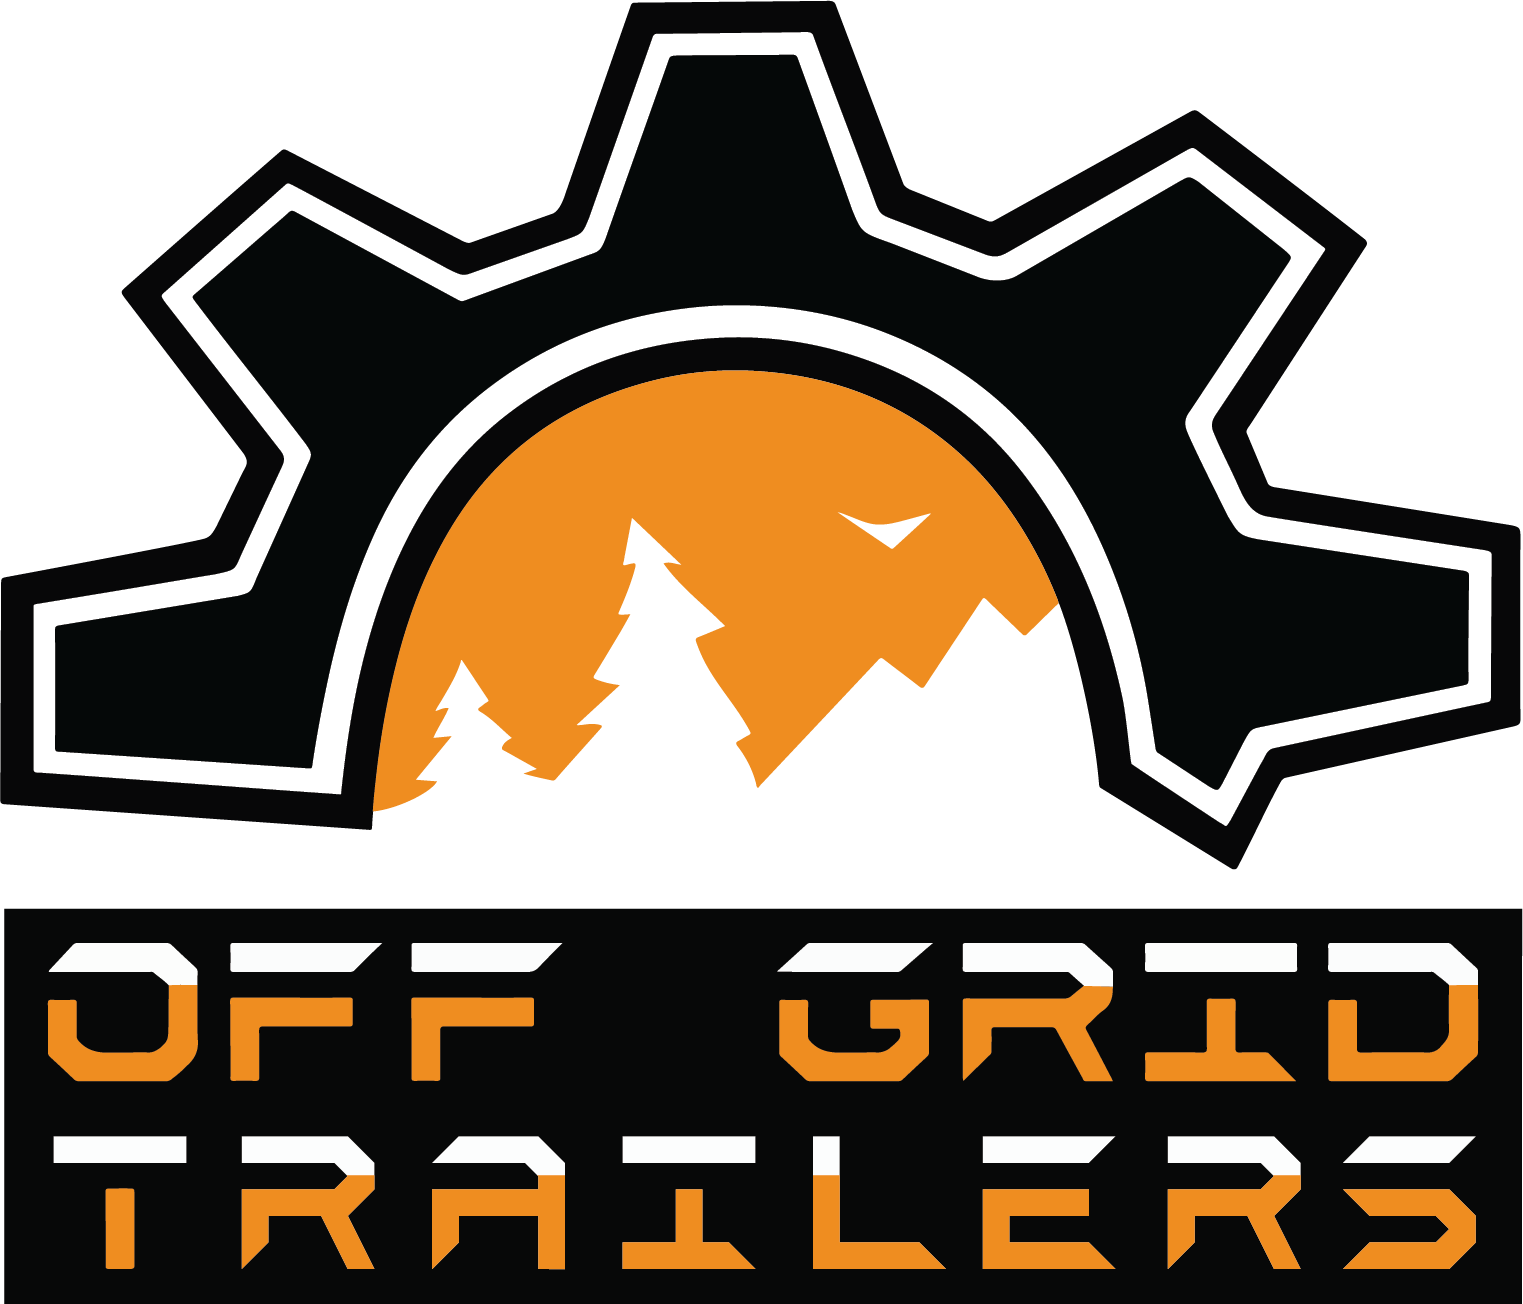 Off Grid Trailers Gift Card